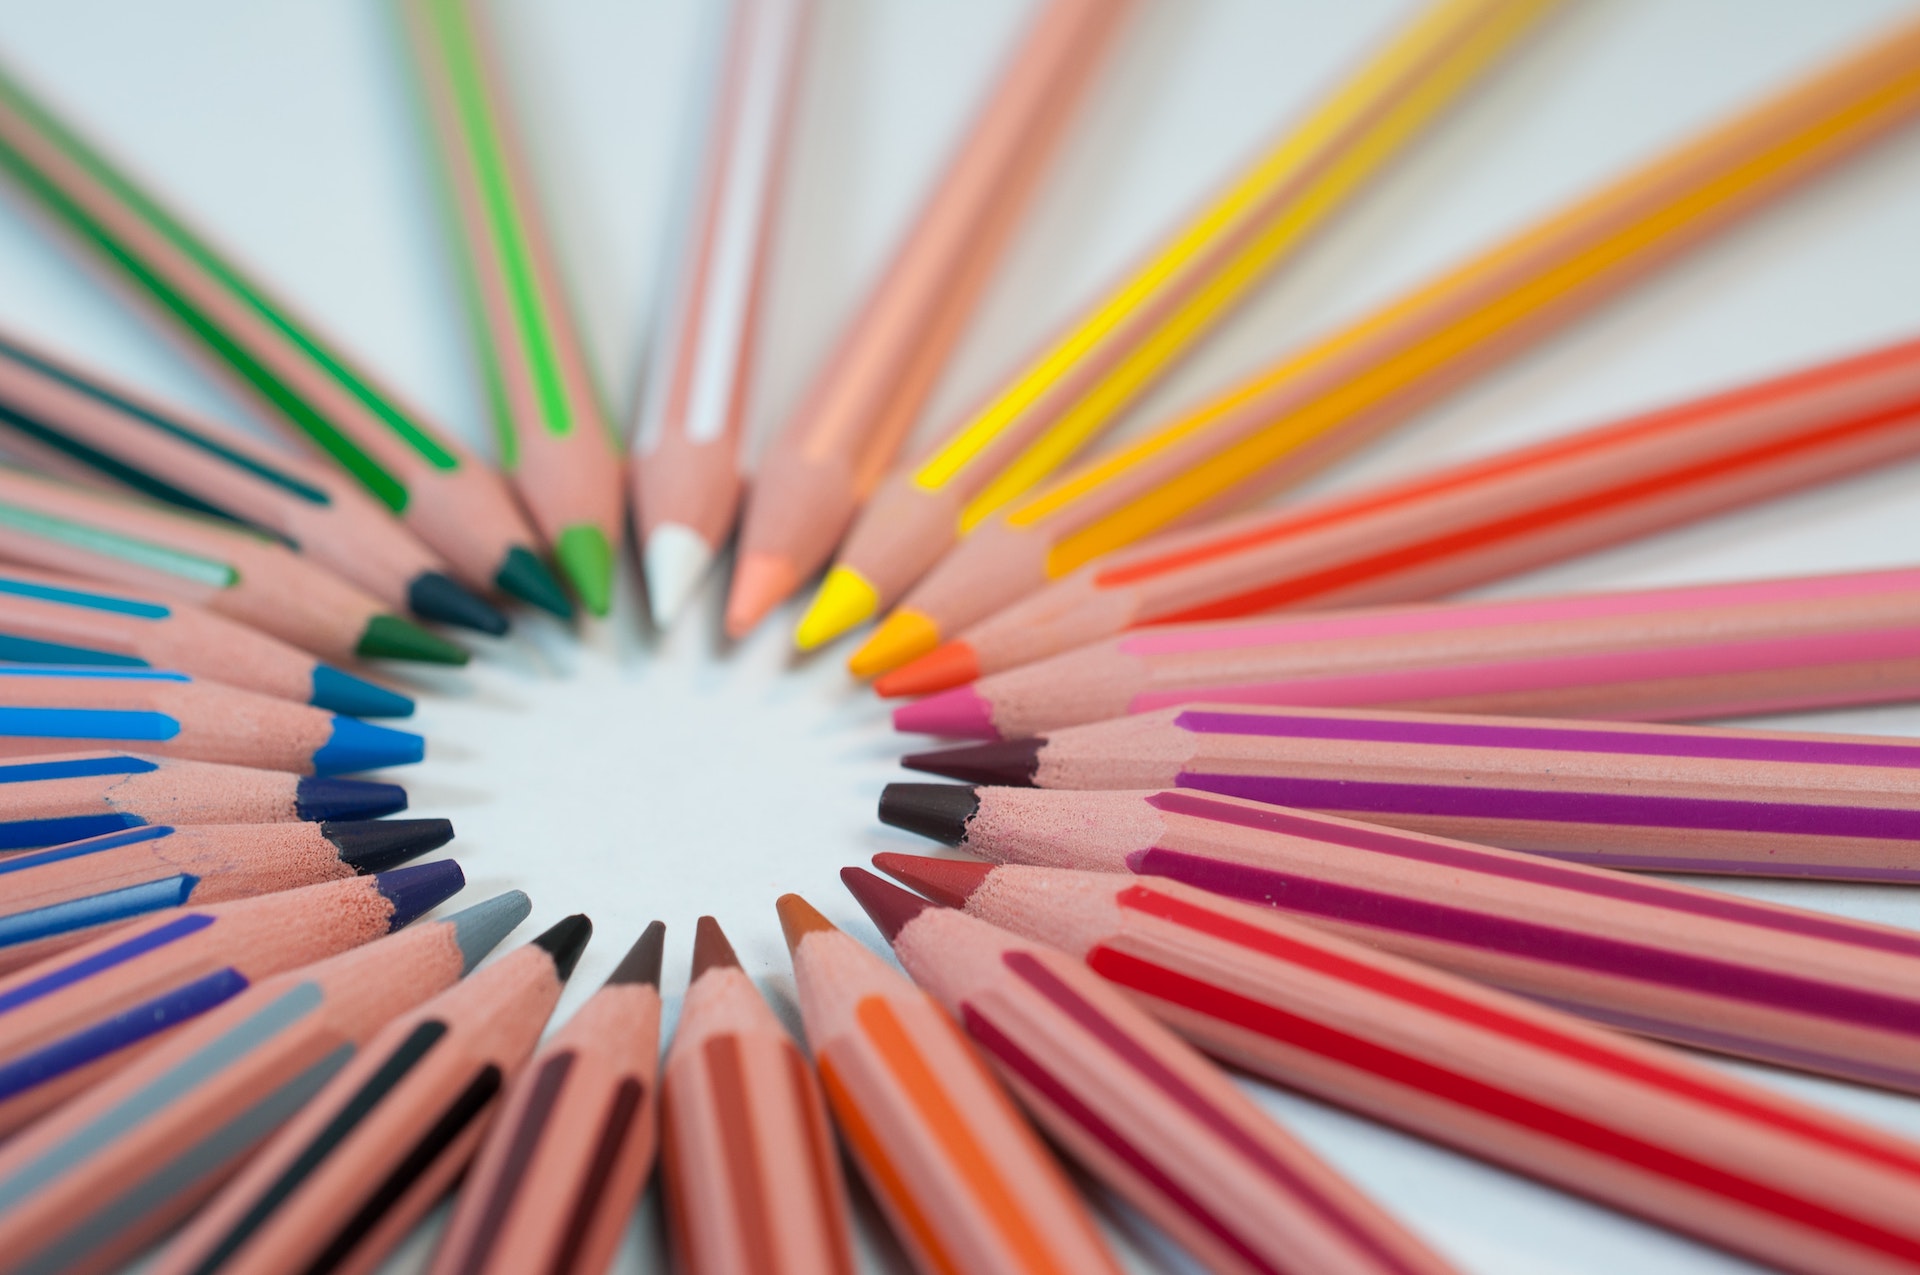 A close up shot of a complete collection of coloured pencils arranged in a circle